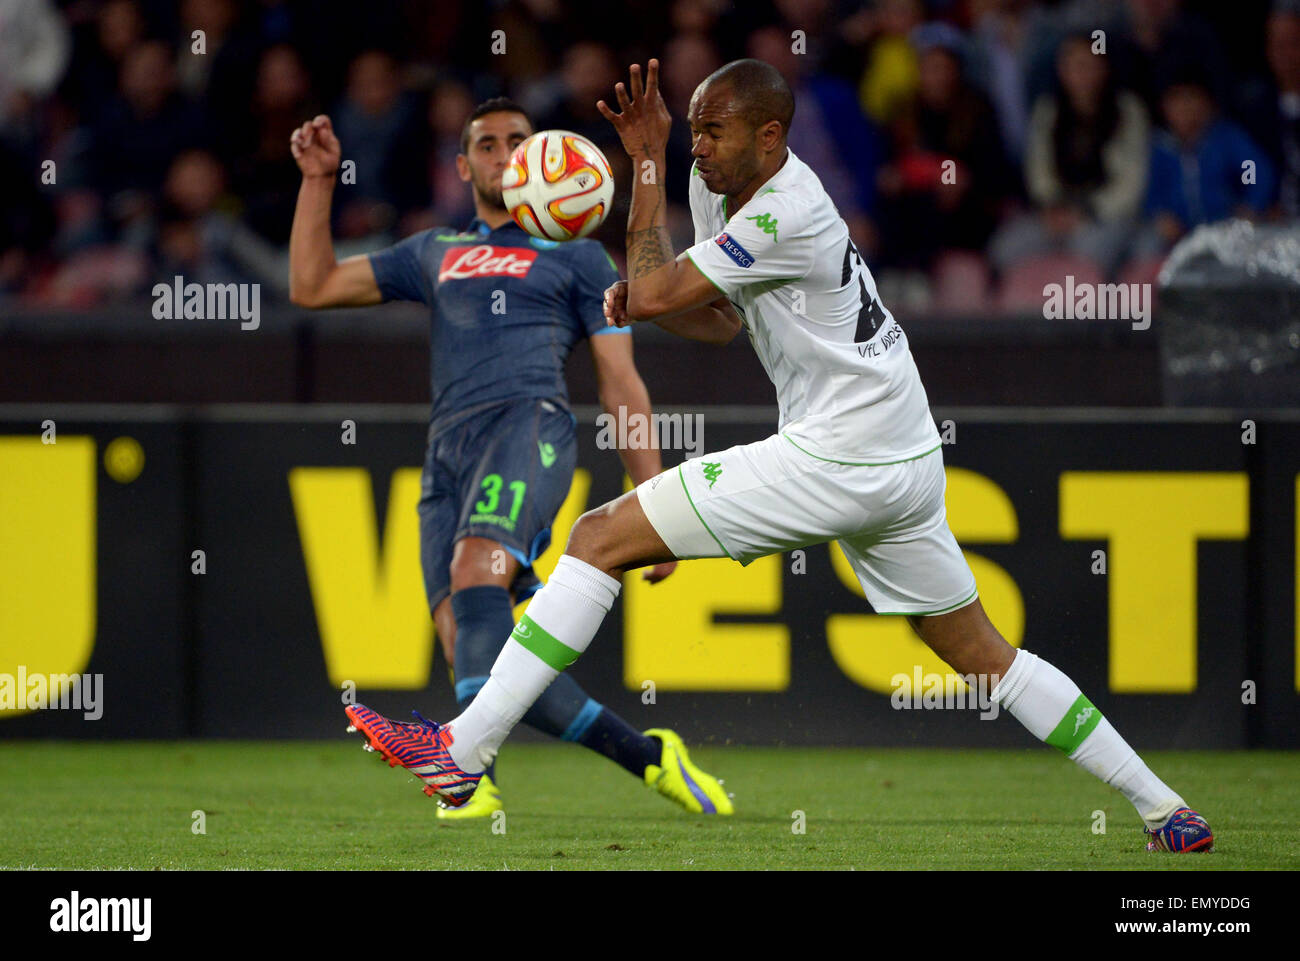 Naples, Italy. 23rd Apr, 2015. Wolfsburg's Naldo (R) and Faouzi Ghoulam of SSC Napoli in action during the UEFA Europa League quarter final second leg soccer match between SSC Napoli and VfL Wolfsburg at San Paolo stadium in Naples, Italy, 23 April 2015. Photo: Peter Steffen/dpa/Alamy Live News Stock Photo